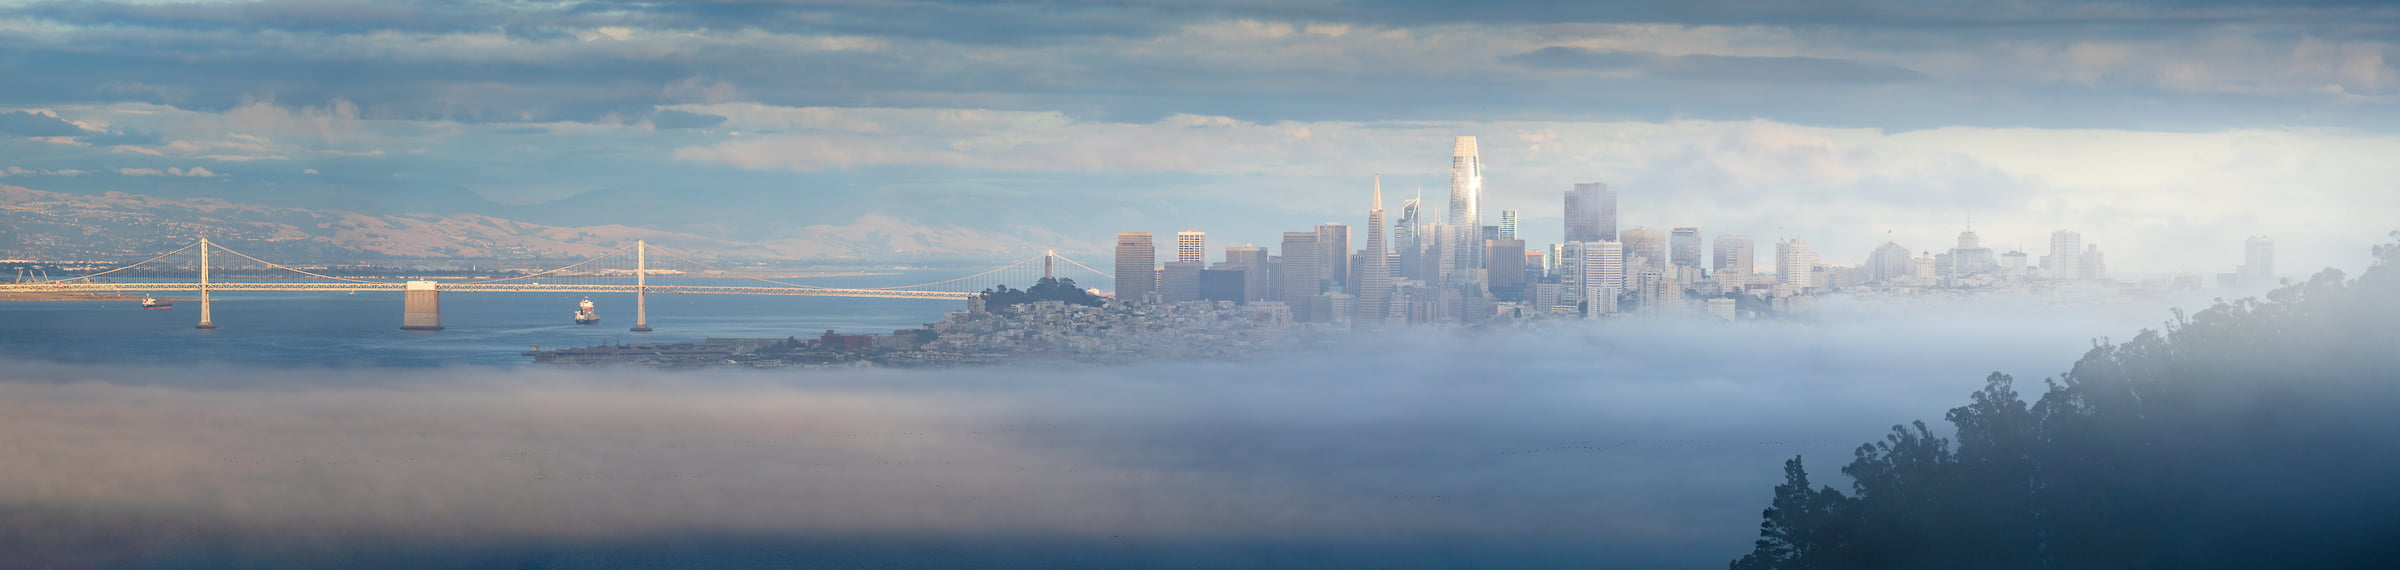 156 megapixels! A very high resolution, large-format VAST photo print of the San Francisco skyline with fog; cityscape photograph created by Jeff Lewis in San Francisco, California.